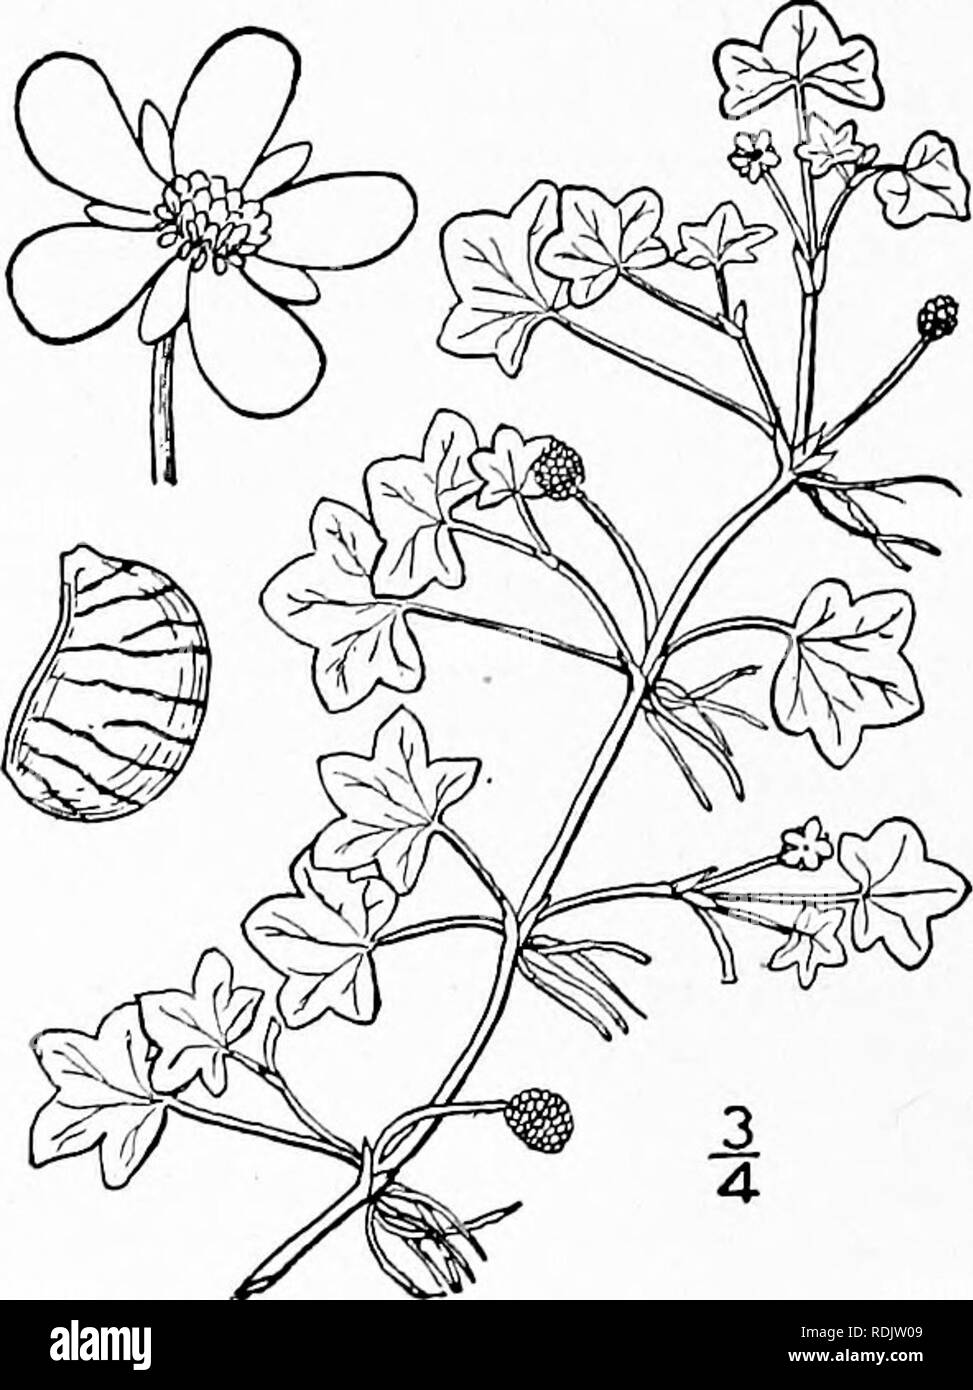 . An illustrated flora of the northern United States, Canada and the British possessions, from Newfoundland to the parallel of the southern boundary of Virginia, and from the Atlantic Ocean westward to the 102d meridian. Botany; Botany. I. Batrachium trichophyllum (Chaix) F. Schultz. White Water-Crowfoot. Fig. 1927. Ranunculus irichophyllus Chaix in Vill. Hist. PI. Dauph. i: 335- 1786- Batrachium trichophyllum F. Schultz, Arch. Fl. France et All. I : 107. 1848. Ranunculus aquatilis var, irichophyllus A. Gray, Man. Ed. 5, 40. 1867. R. aquatilis var. caespitosus DC. Prodr. i : 26. 1824. R. aquat Stock Photo